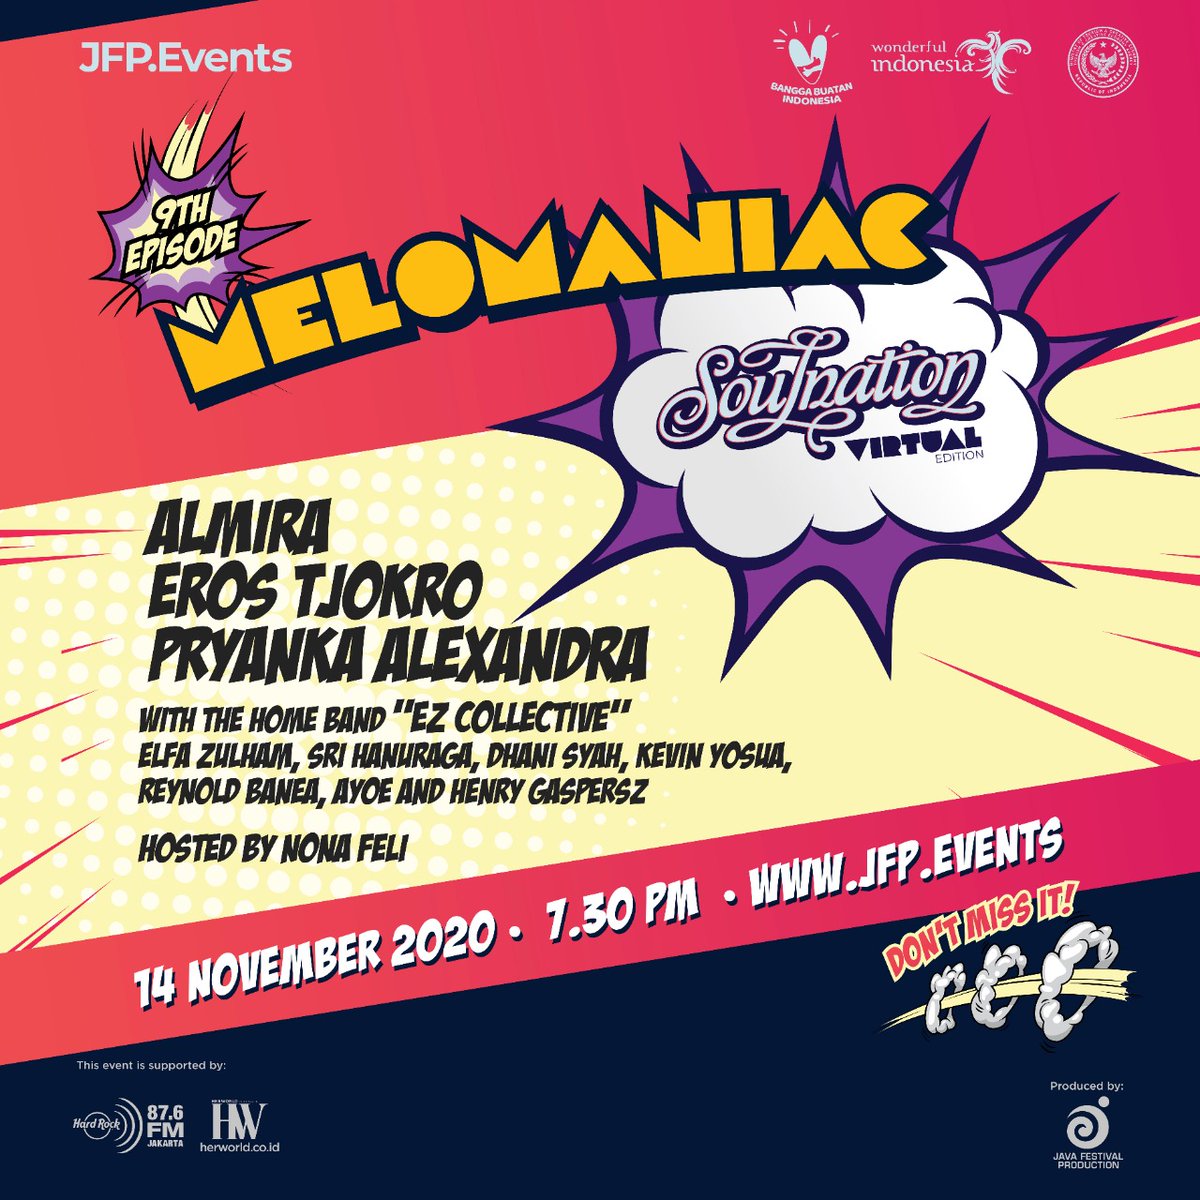 Tomorrow for Melomaniac 9th Episode: Soulnation Virtual Edition will take your breath away with the performances of ALMIRA, Eros Tjokro, Pryanka Alexandra and EZ Collective! Get your tickets now at jfp.events!
#Melomaniac #JavaFestivalProduction #JFPEvents